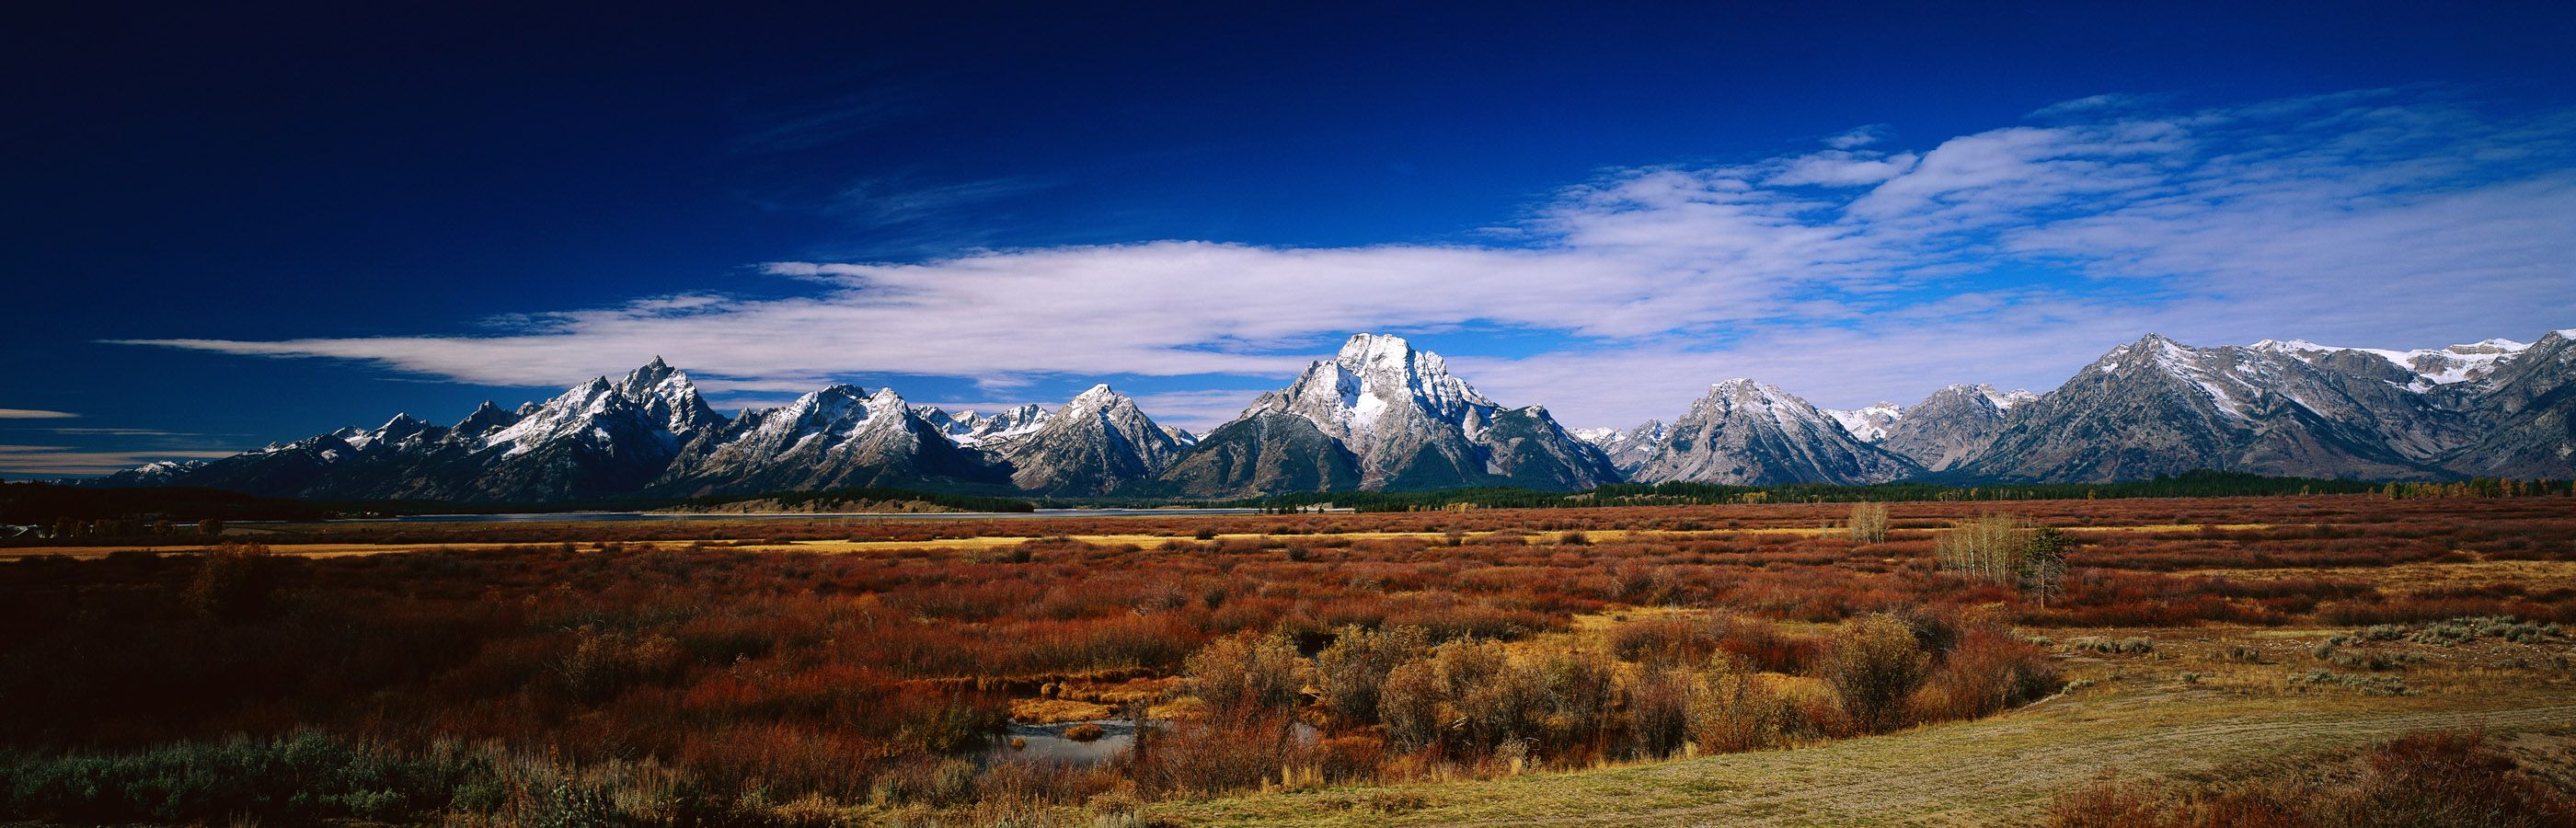 Outstanding Rocky Mountain wallpaper Landscapes wallpapers 2800x900